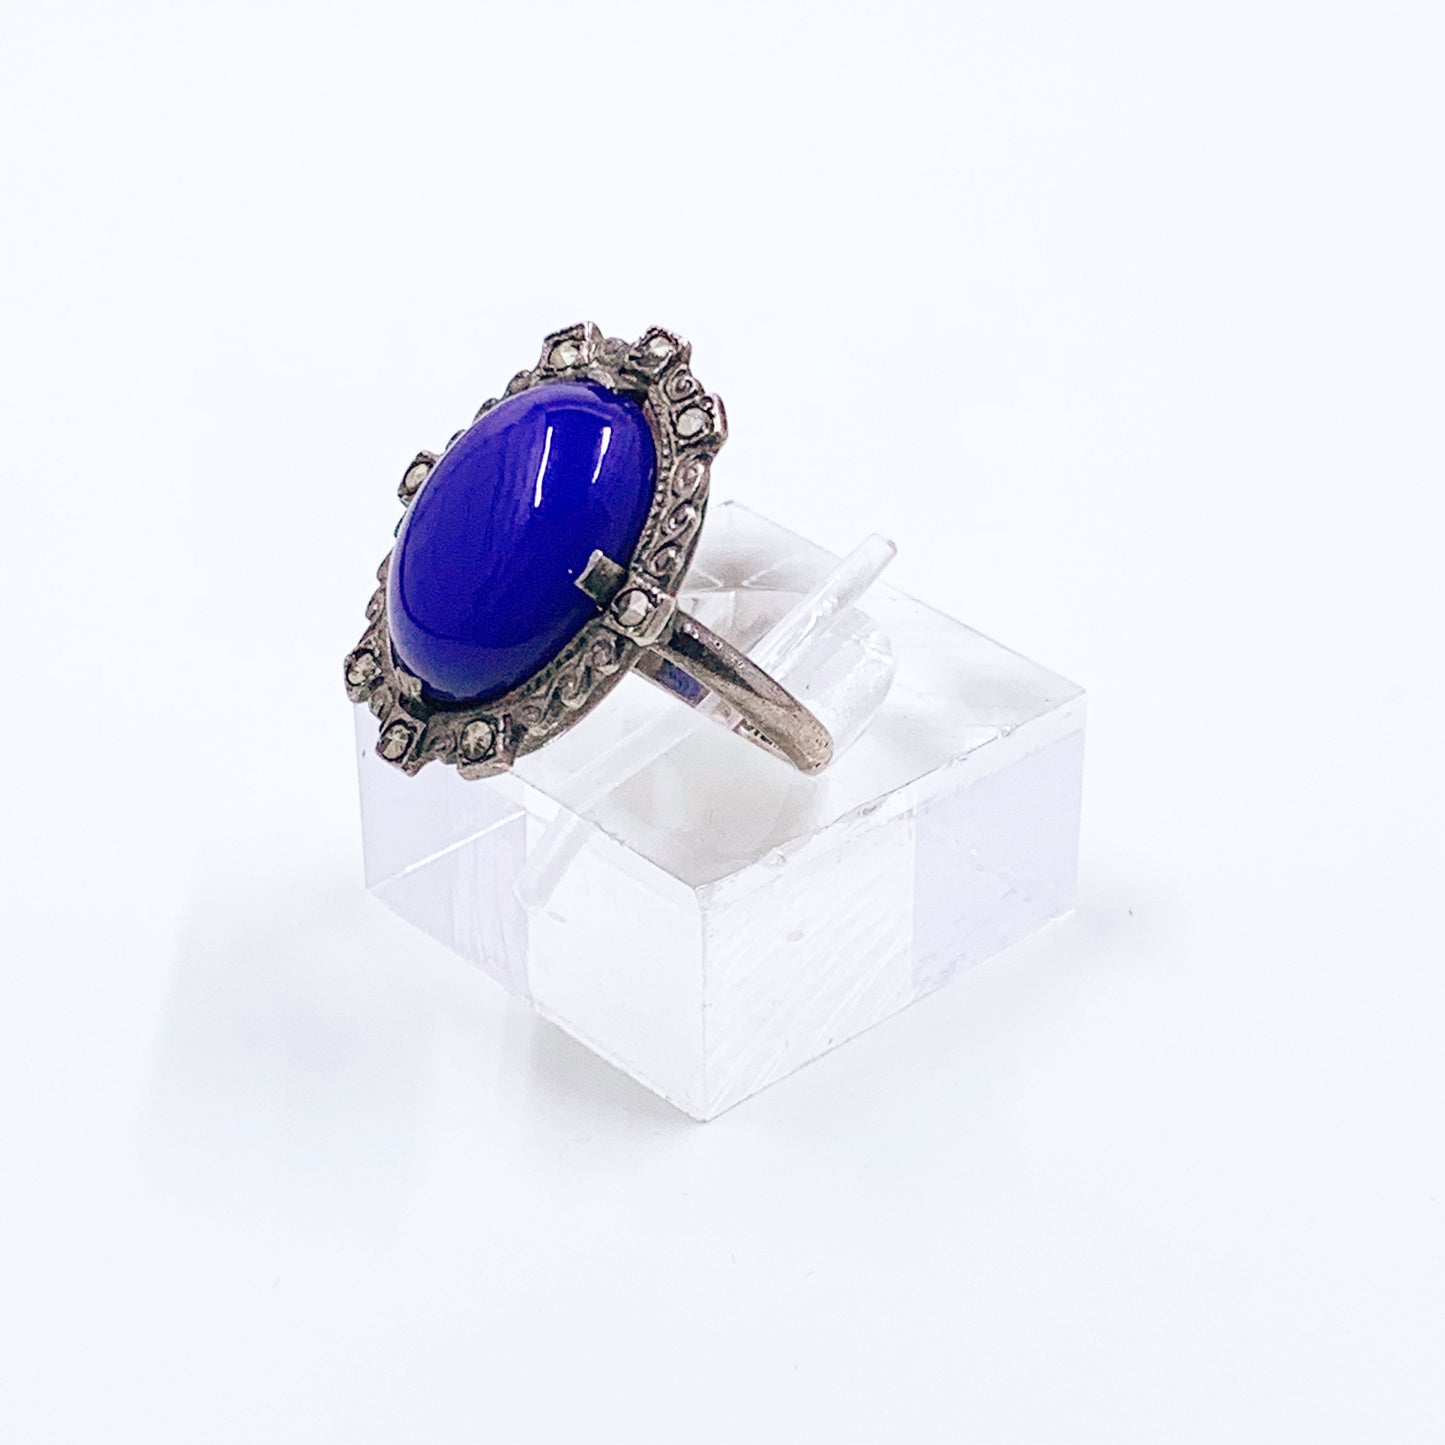 Vintage Sterling Silver Art Deco Style Ring | Marcasite Blue Glass Ring | Size 4 Ring